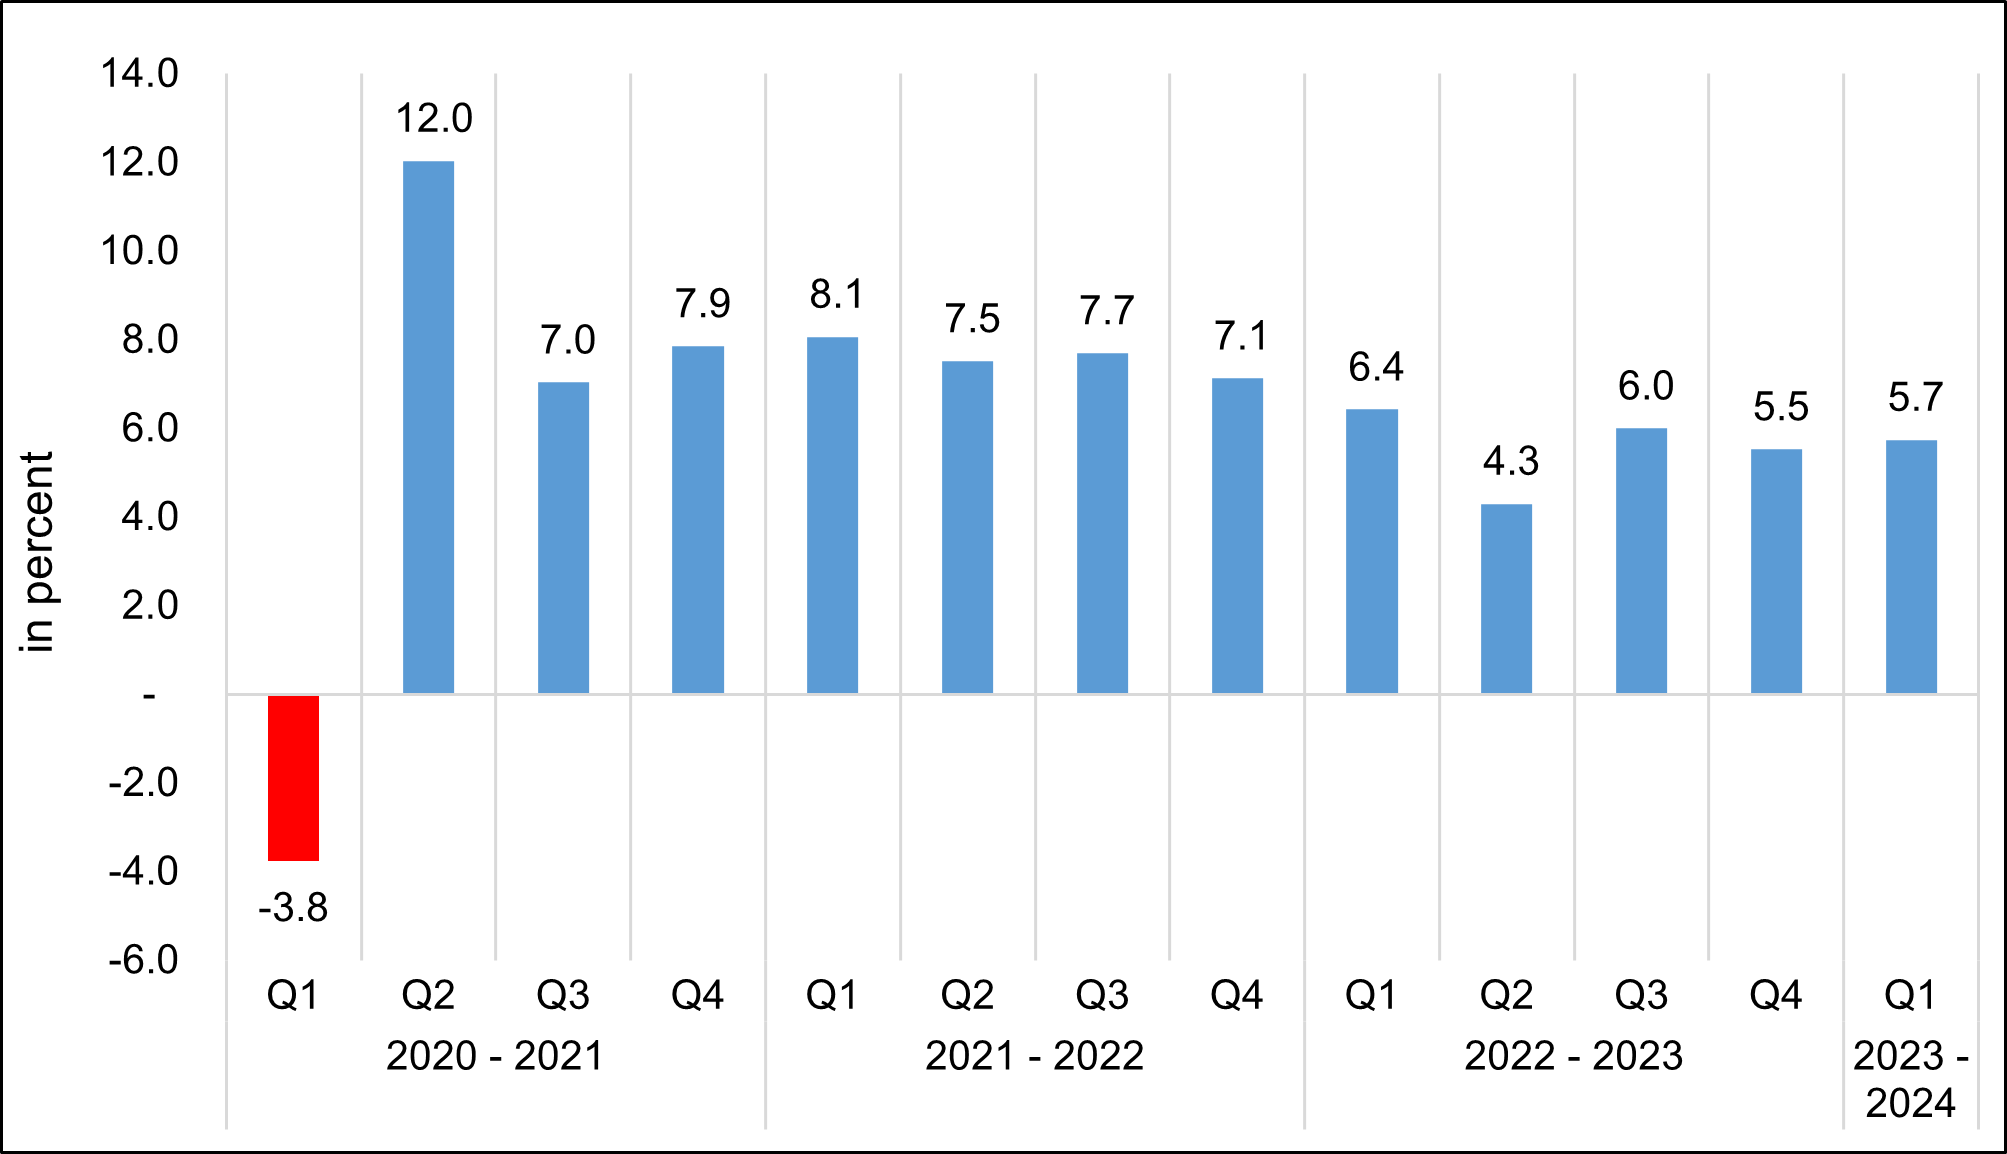 Figure 2. Agriculture, Forestry, and Fishing, Q1 2021 to Q1 2024 Growth Rates, At Constant 2018 Prices